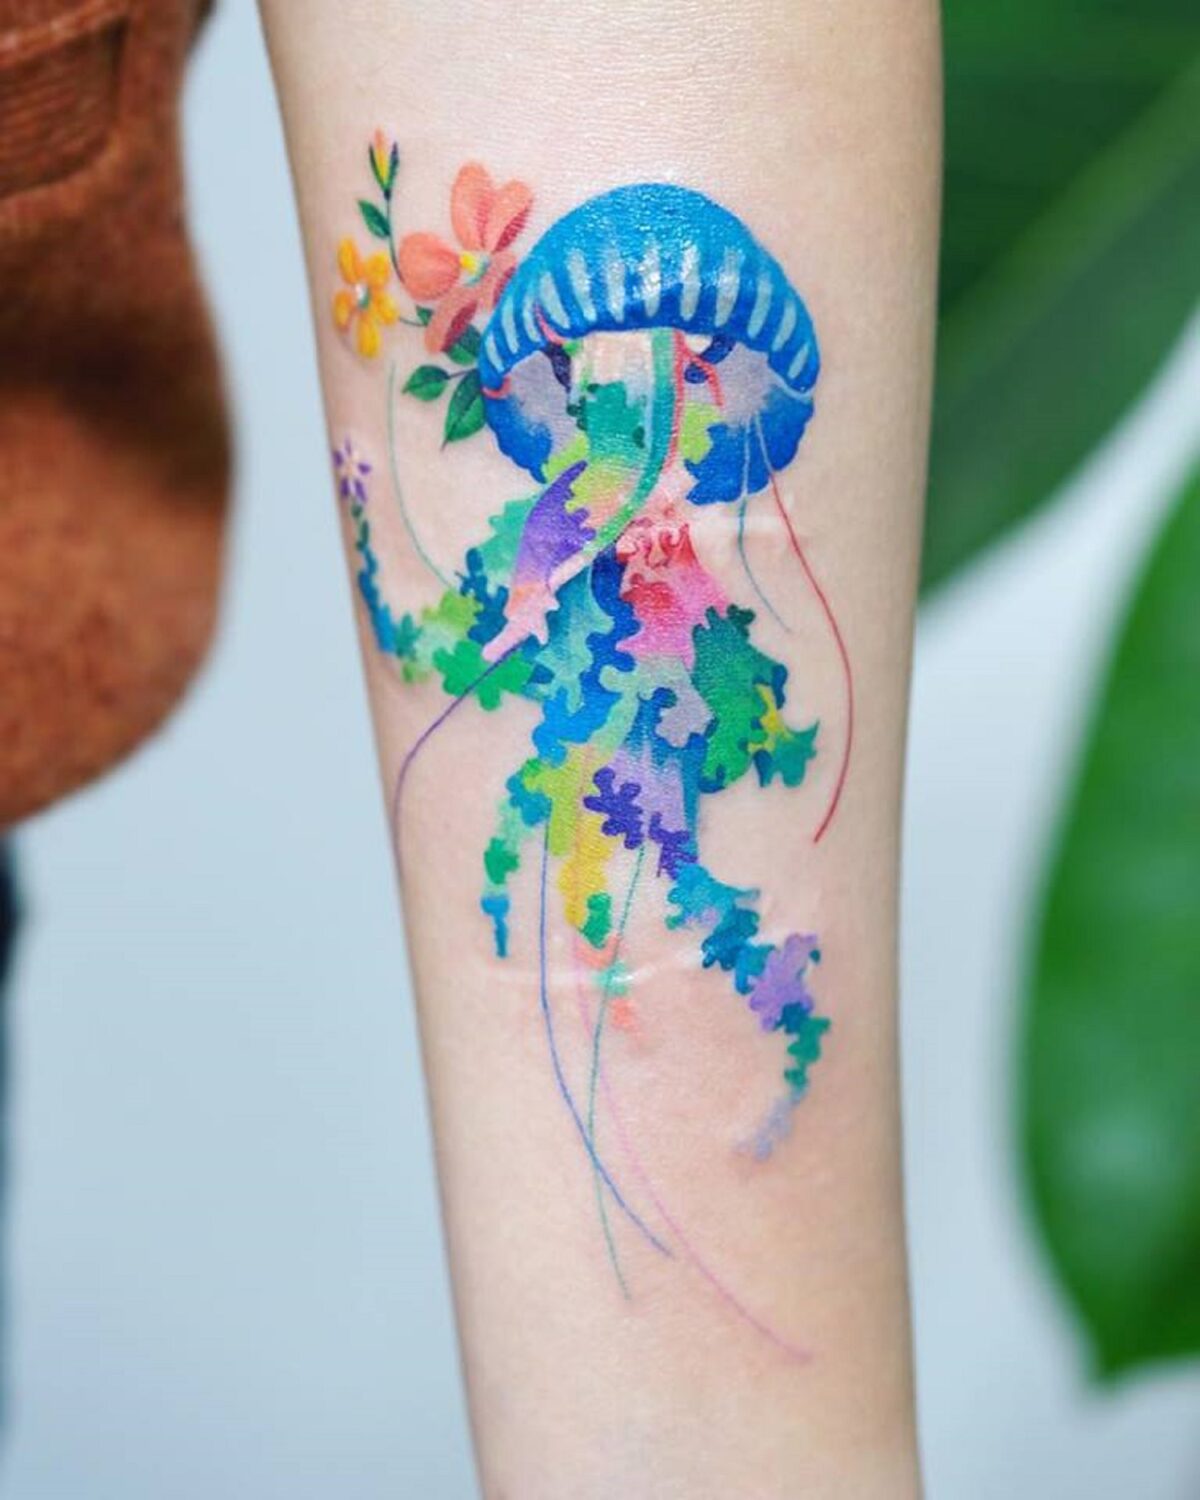 Vibrant And Multicolored Fauna And Flora Tattoos By Zihee 15